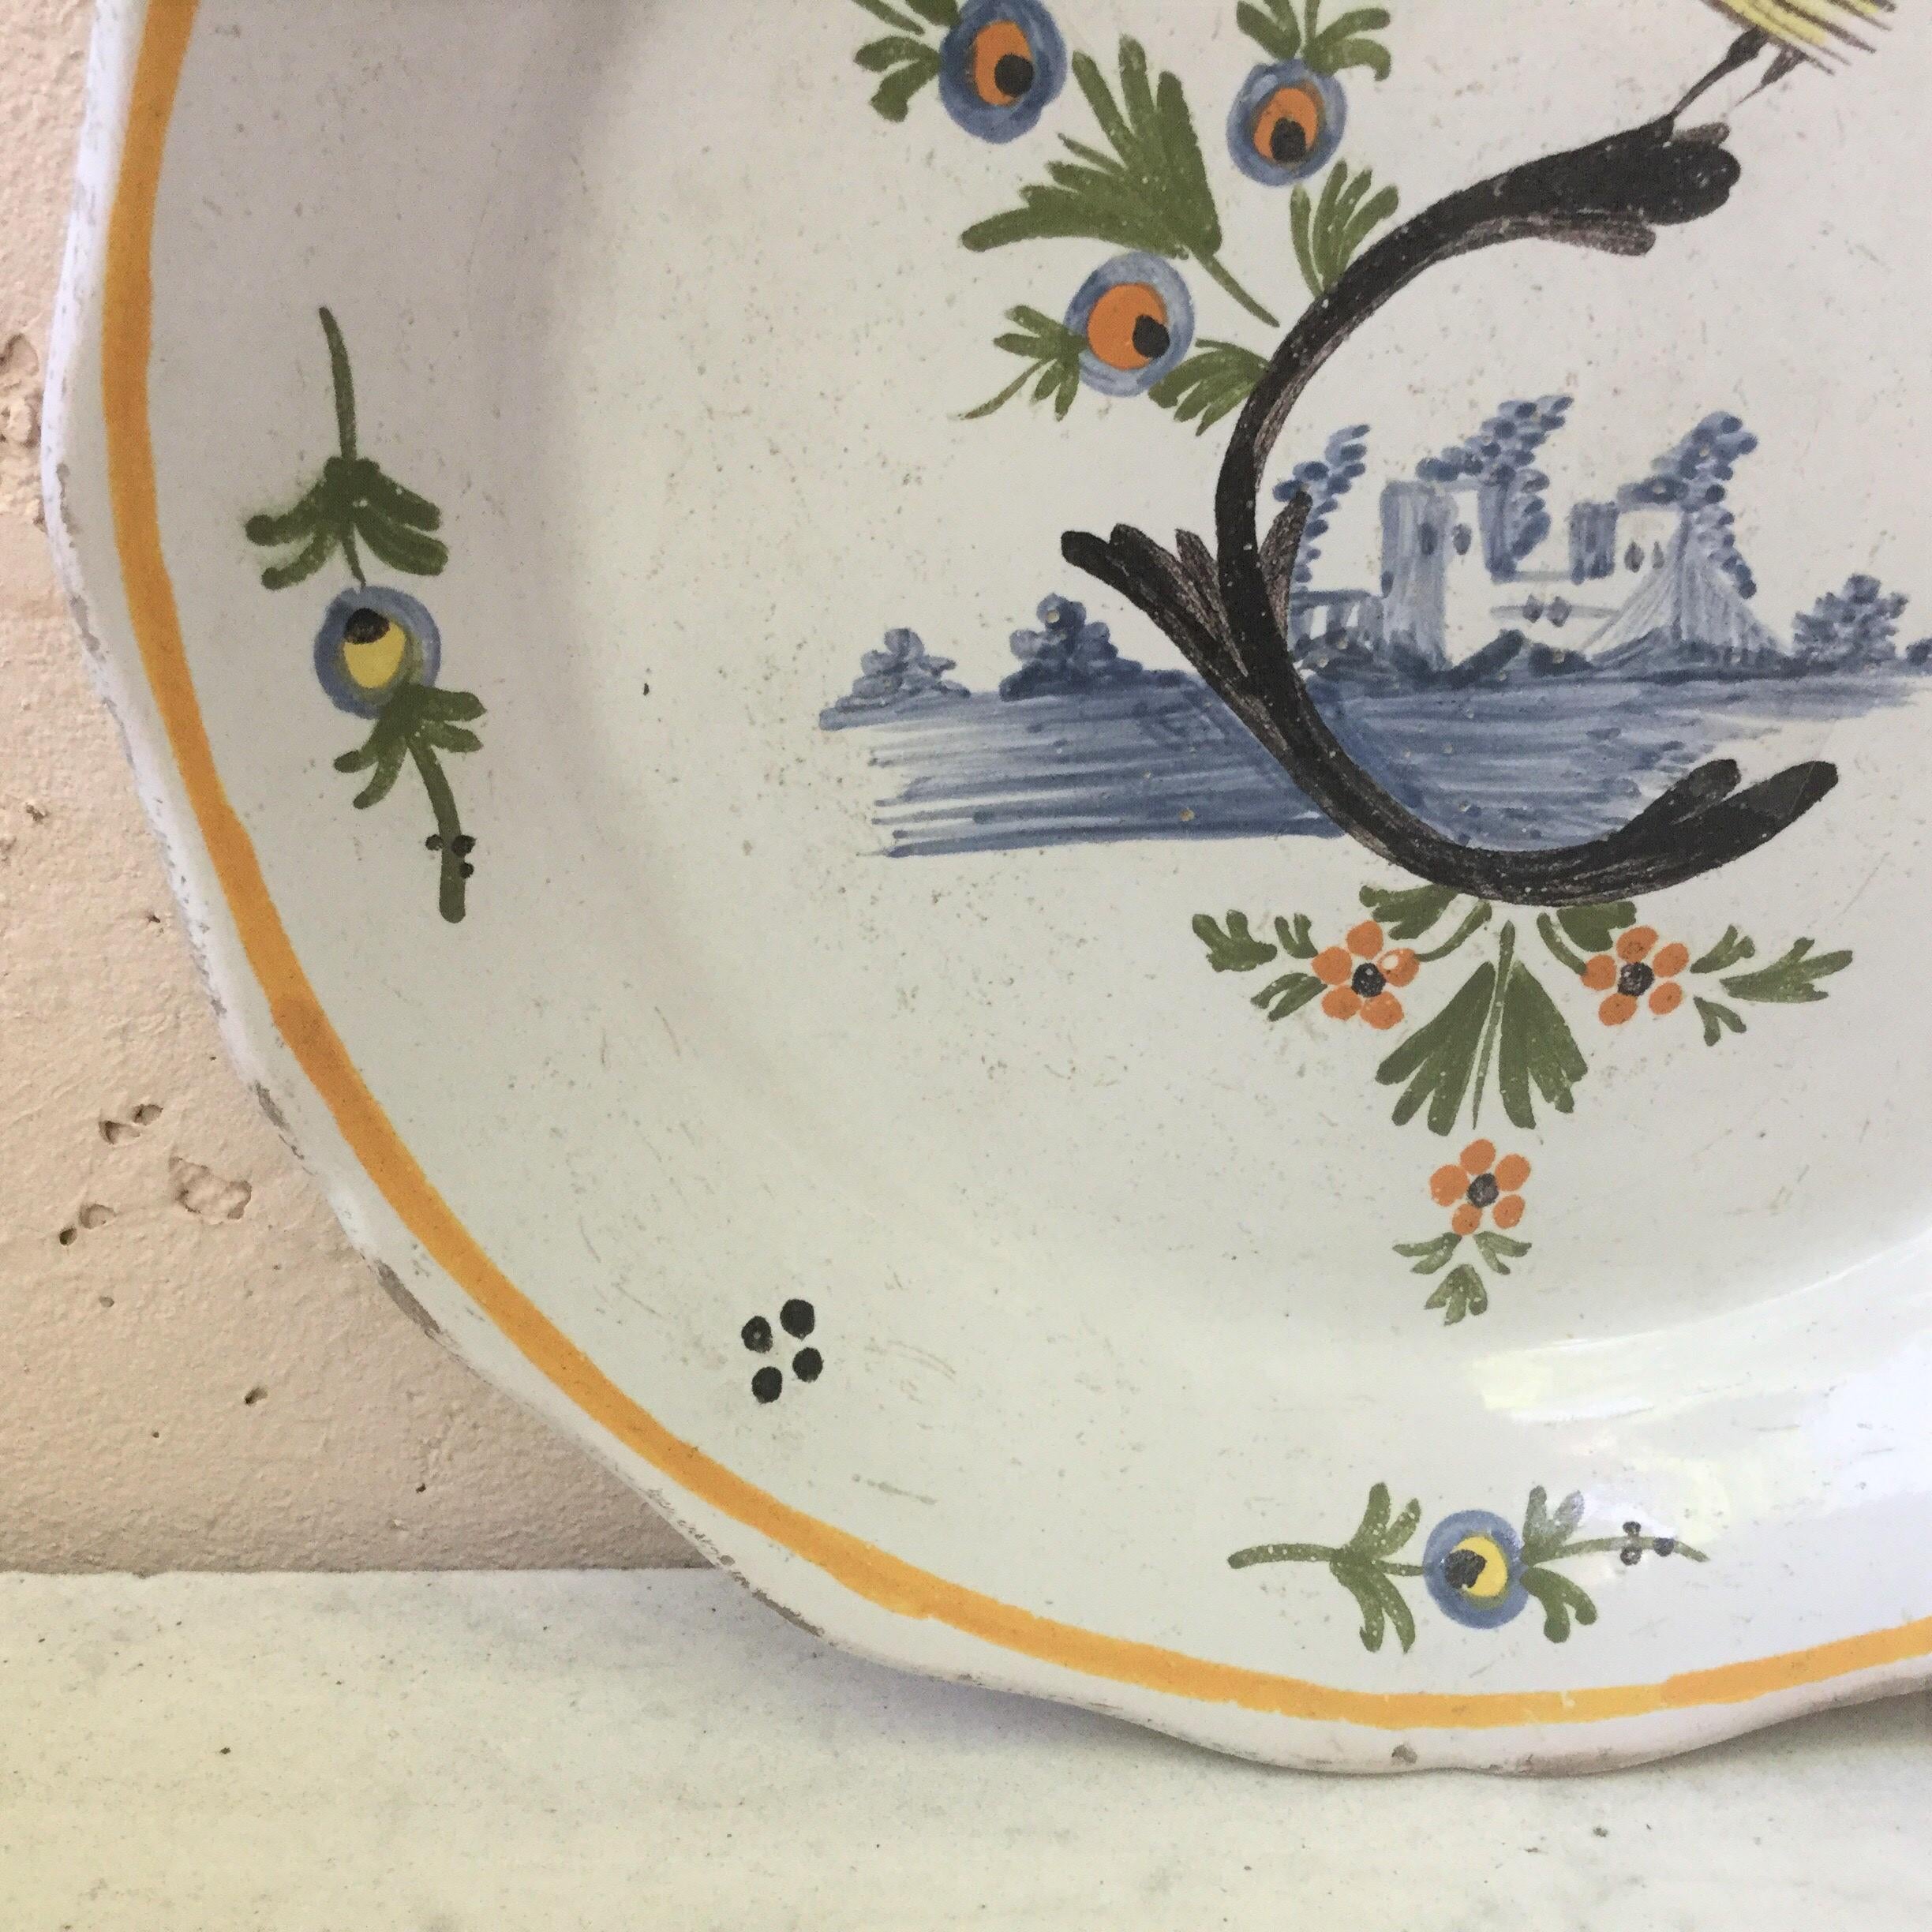 18th century French faience bird in a branch nevers plate.
A yellow bird on a branch with ruins on the back.
The border is decorated with stylized flowers.